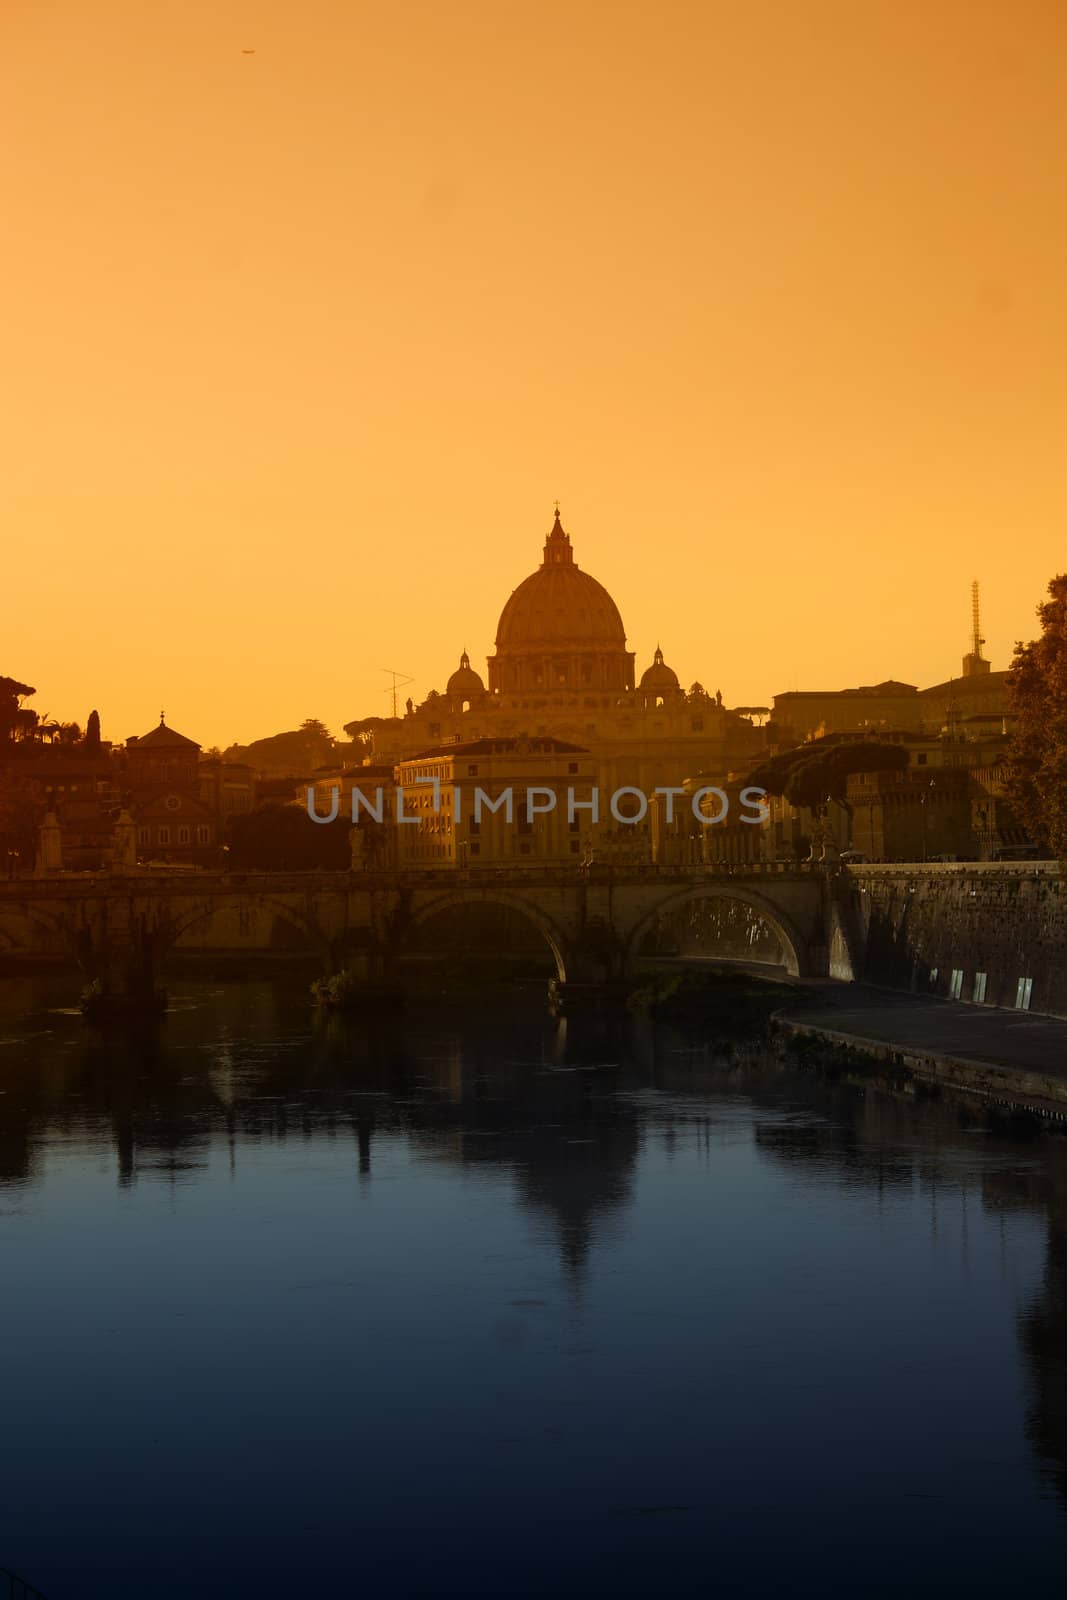 Rome, architecture, St. Peter's Basilica, Catholicism, Christian, Christianity, church, dome, Italy, Landescape, sunset, river , Pope, prayer, priest, tourism, Vatican,